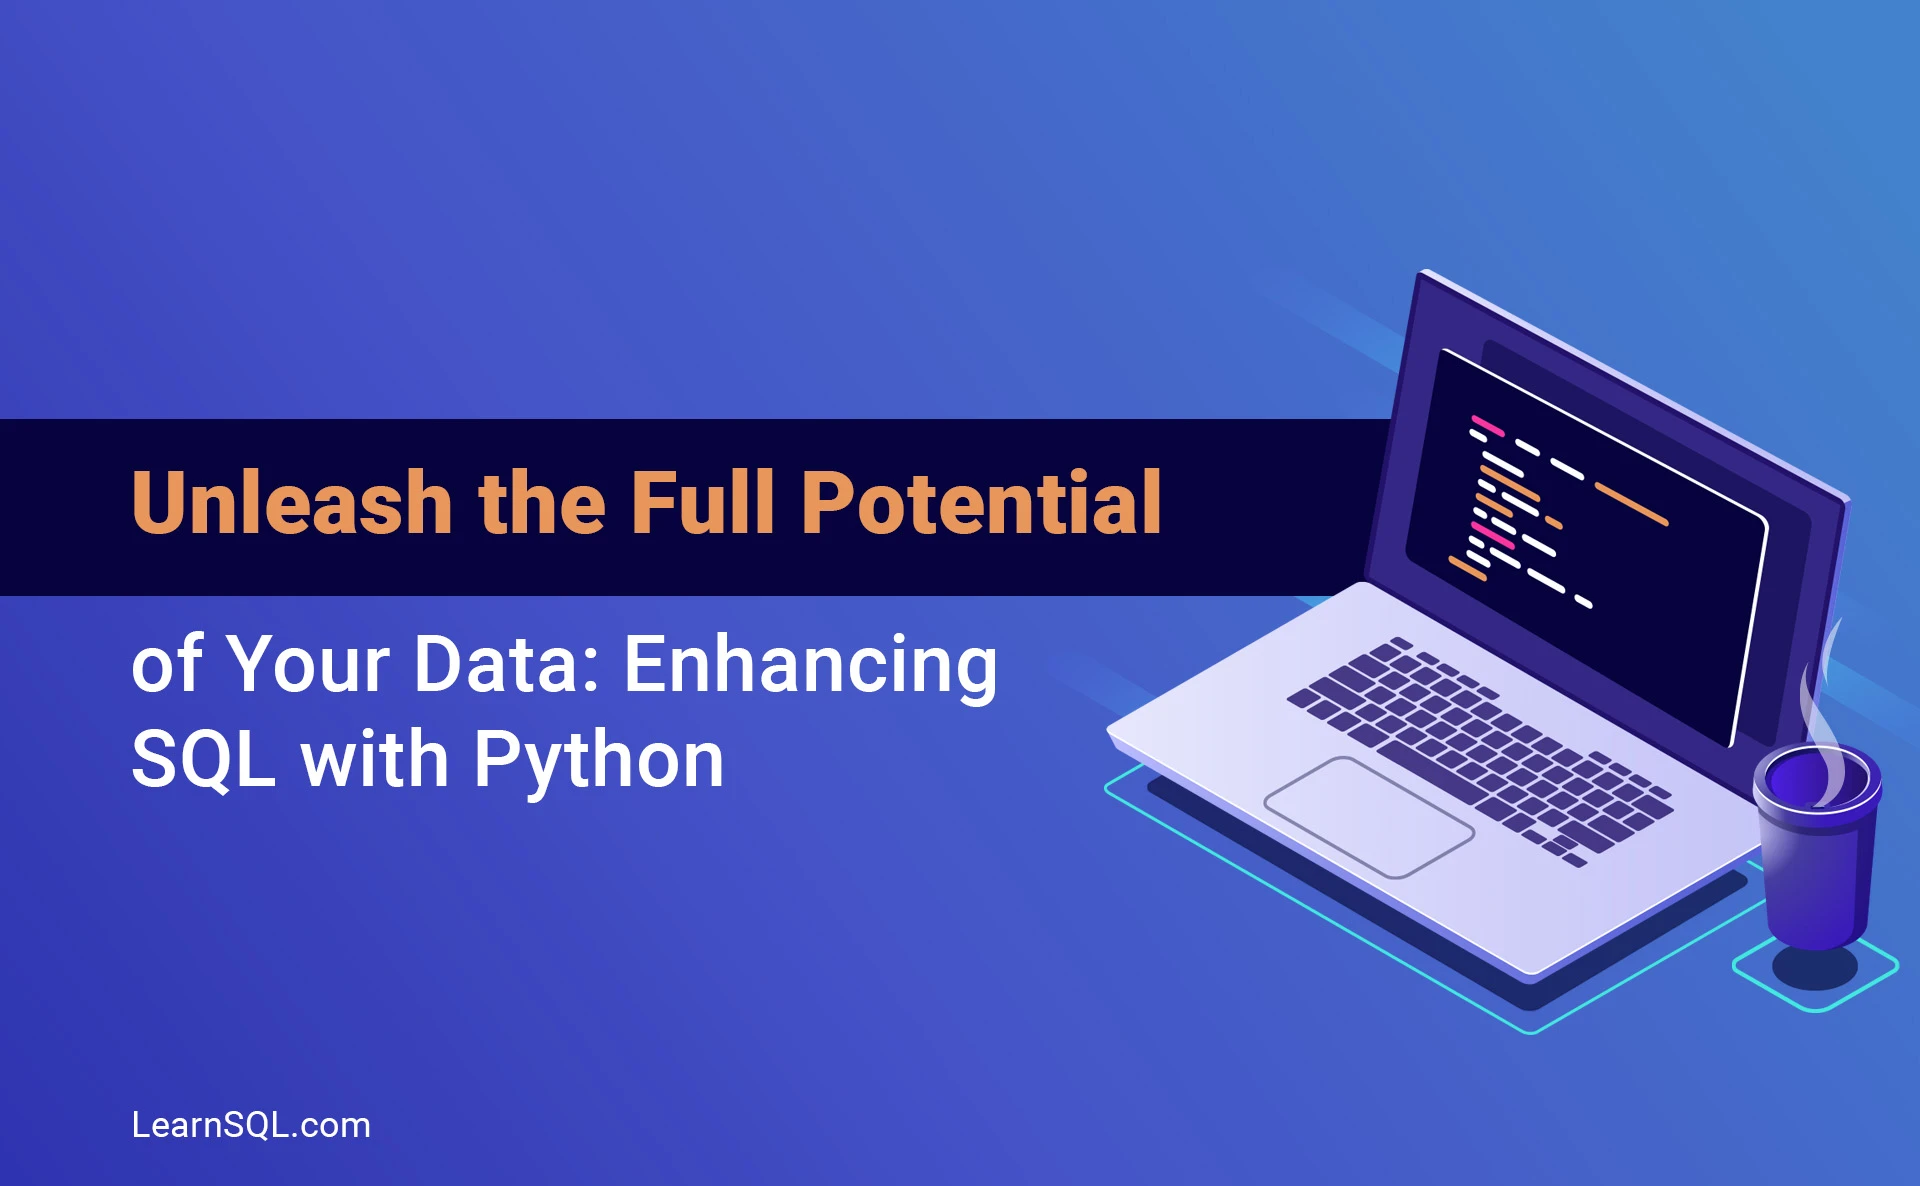 Unleash the Full Potential of Your Data: Enhancing SQL with Python